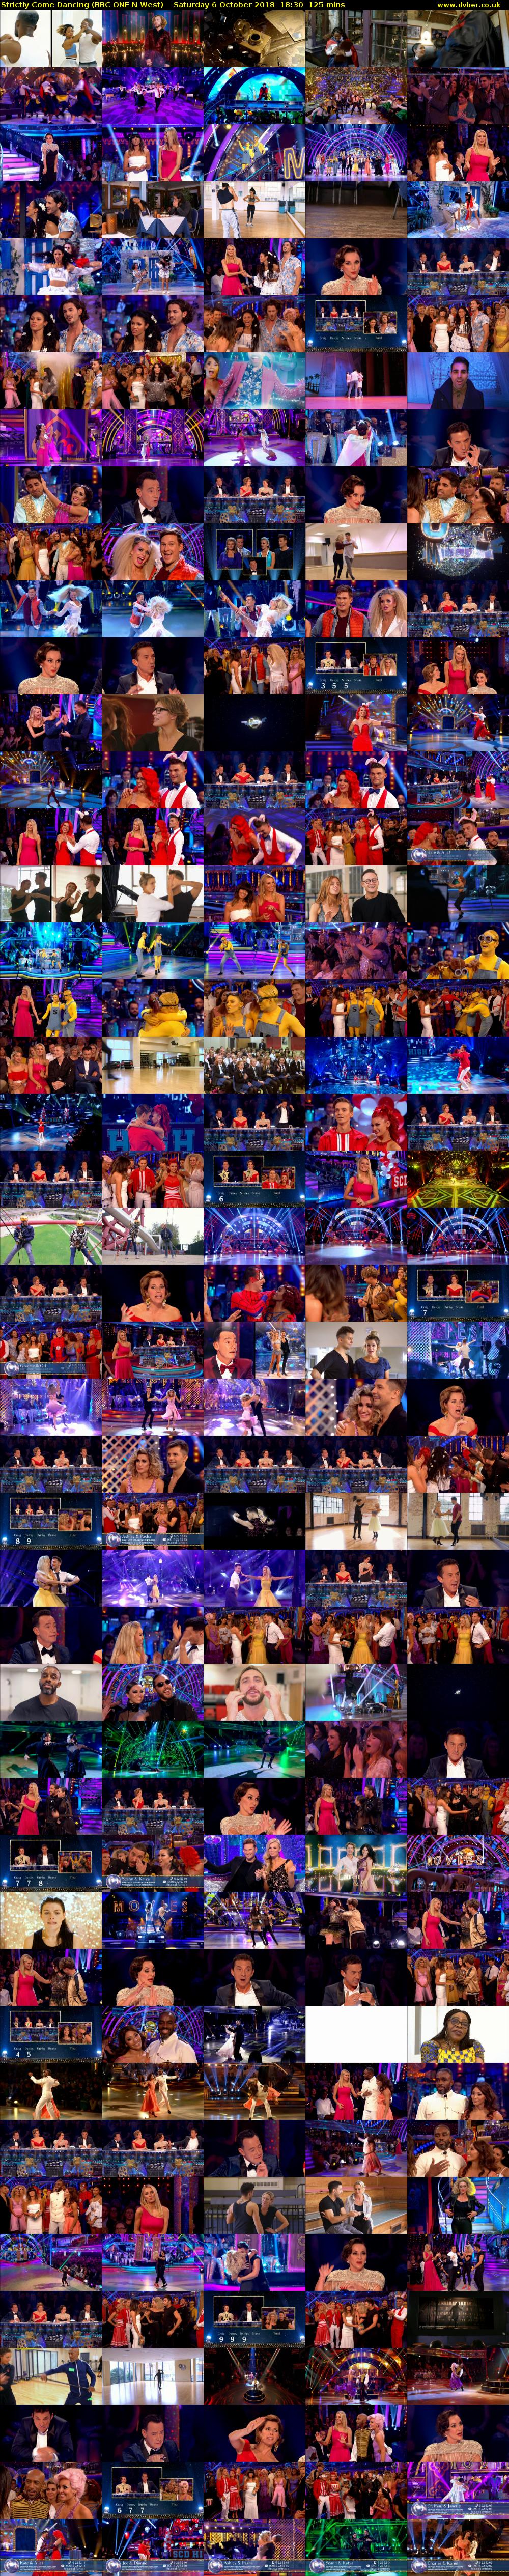 Strictly Come Dancing (BBC ONE N West) Saturday 6 October 2018 18:30 - 20:35